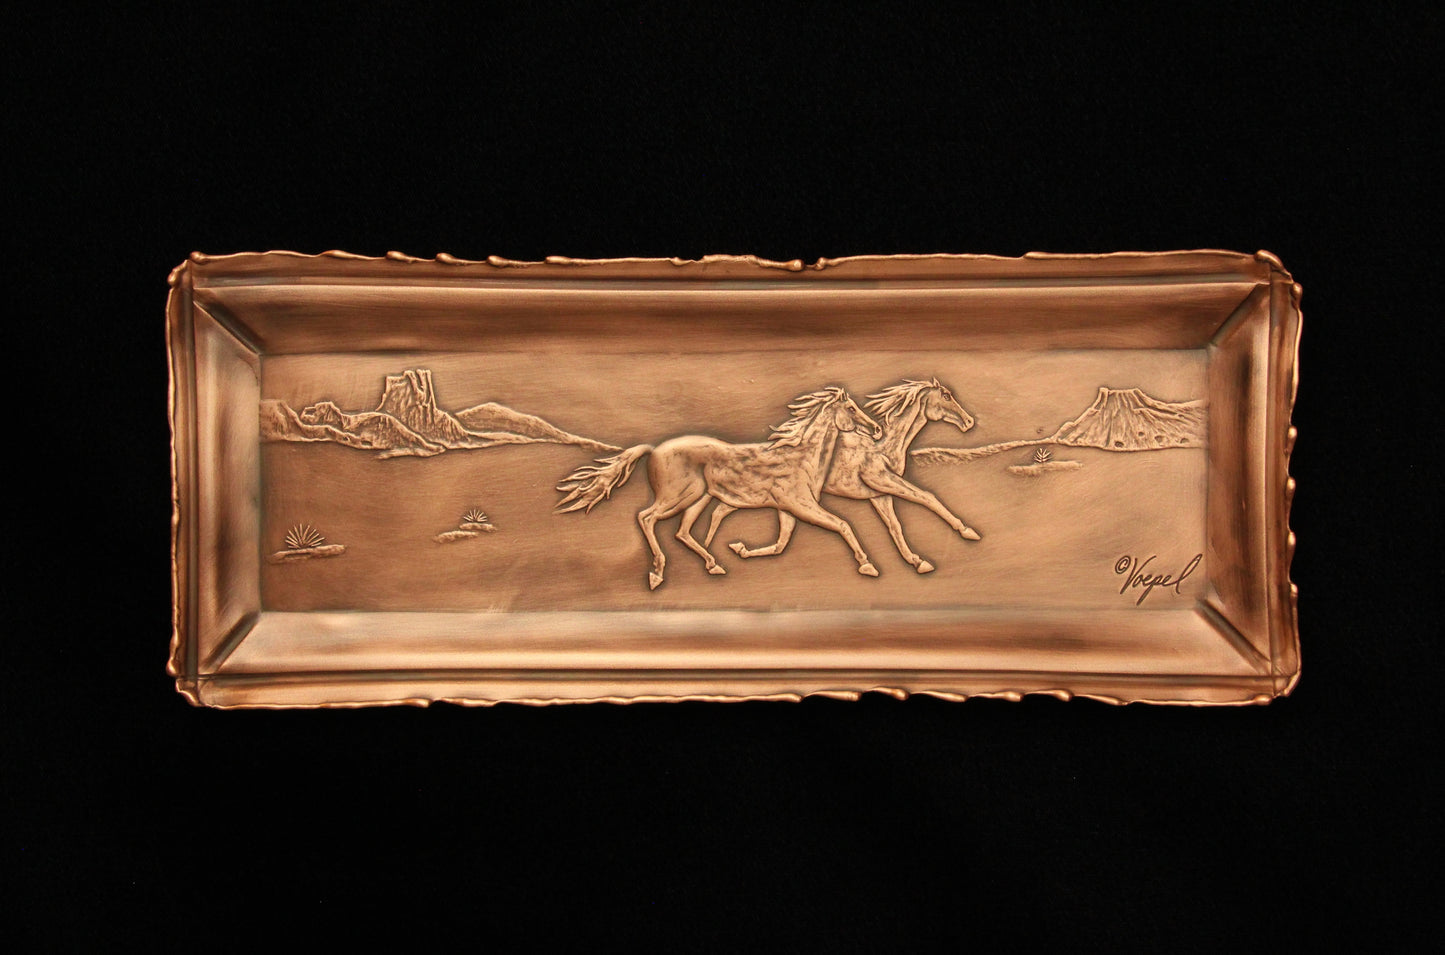 Galloping Horses Tile/Tray, 4" x 10".